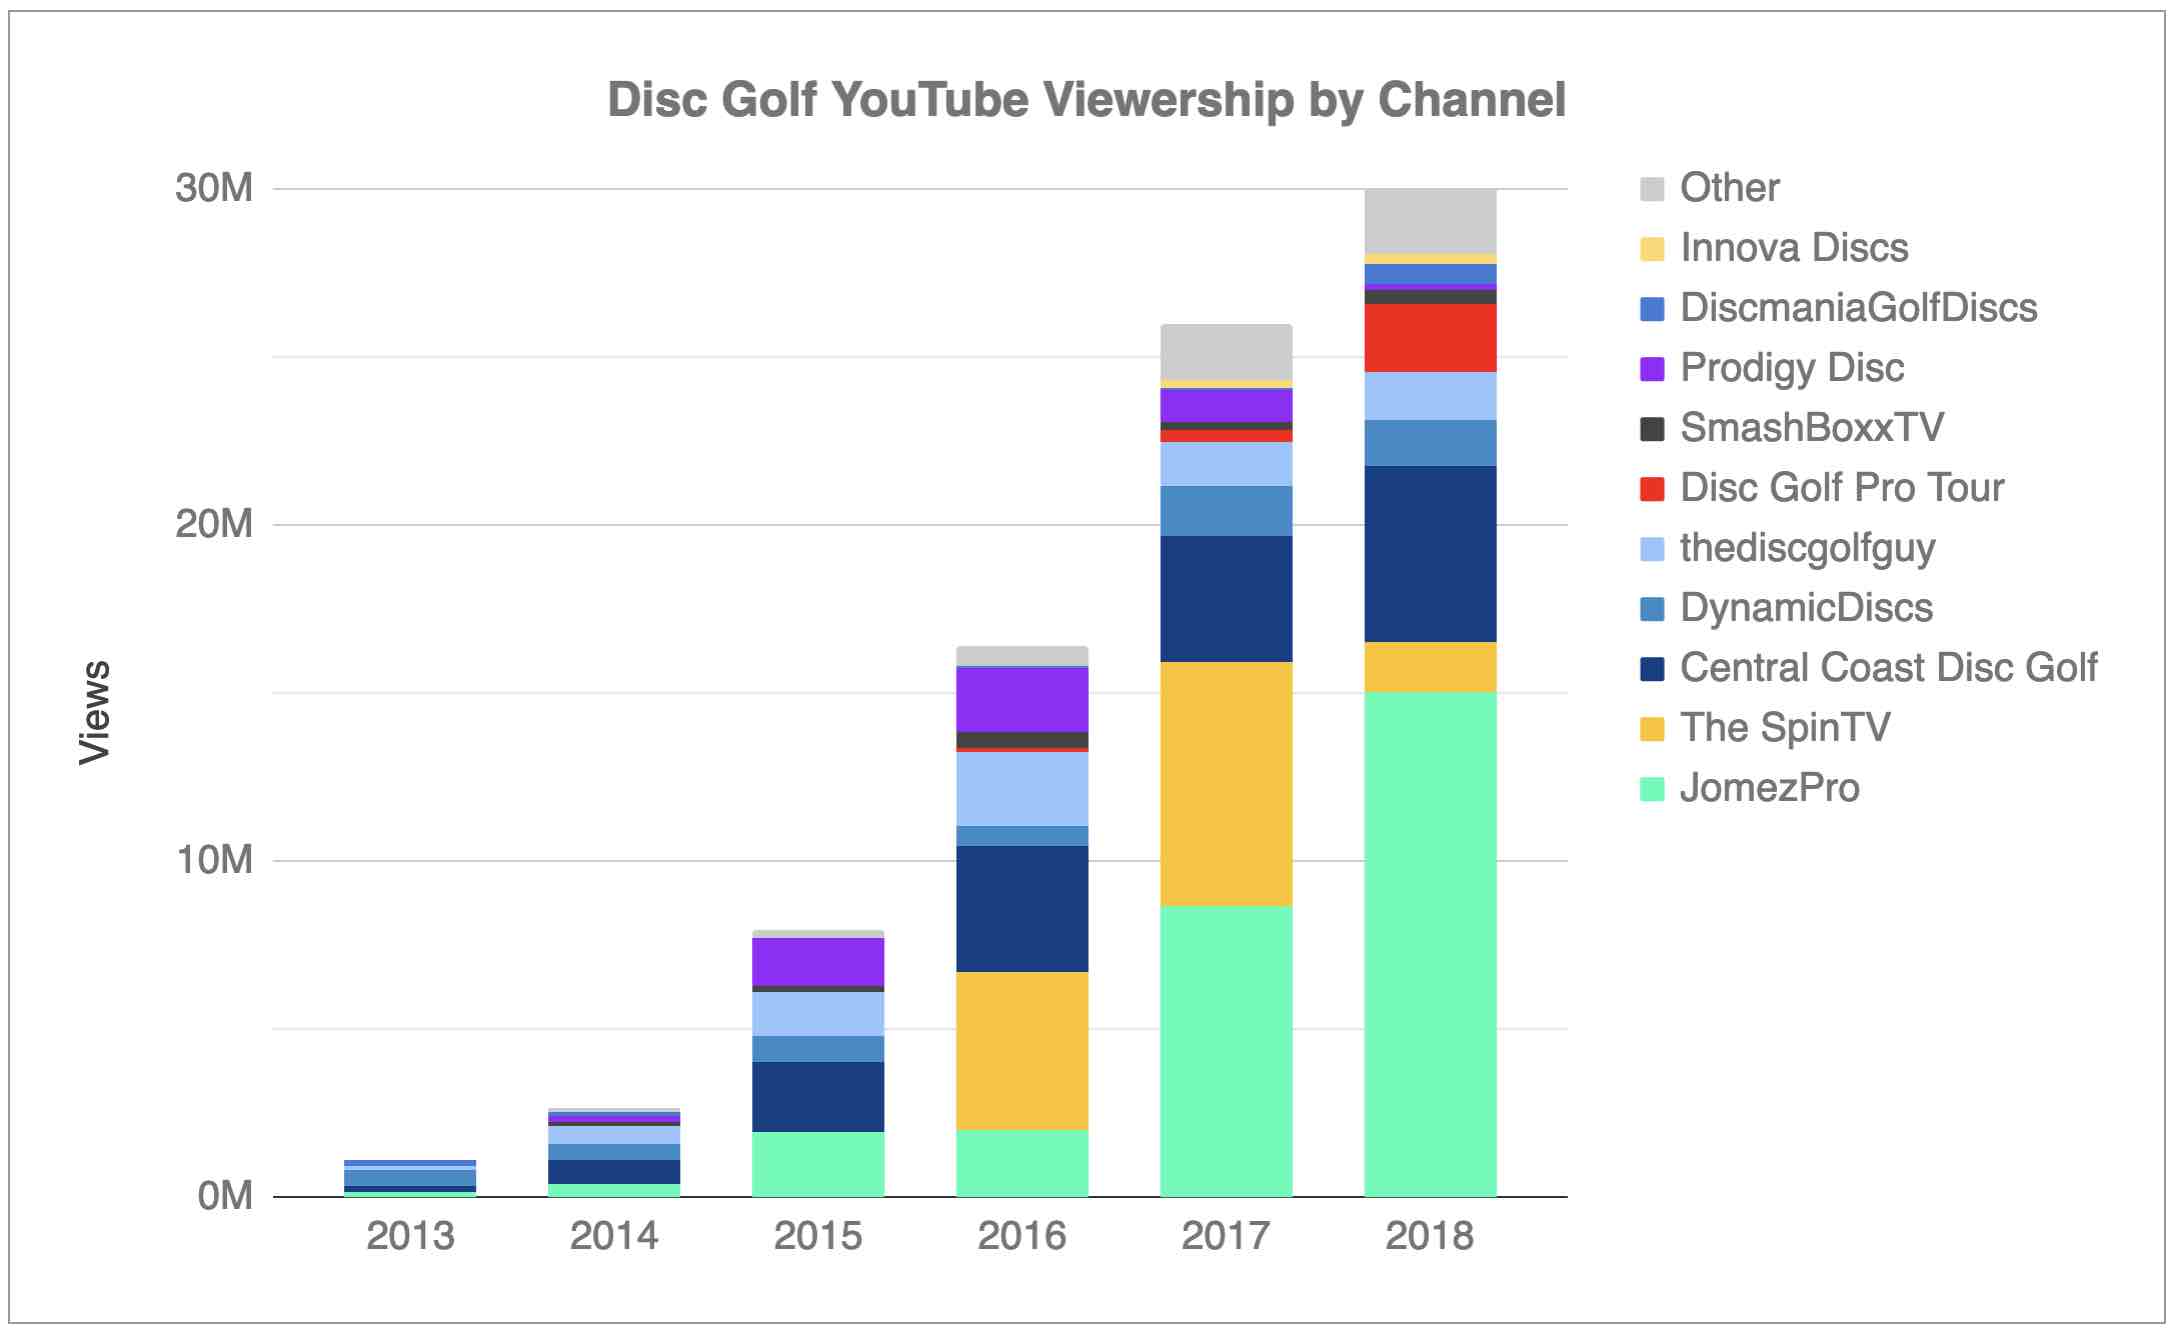 Chart showing the view numbers of various disc golf media channels from 2013-2018